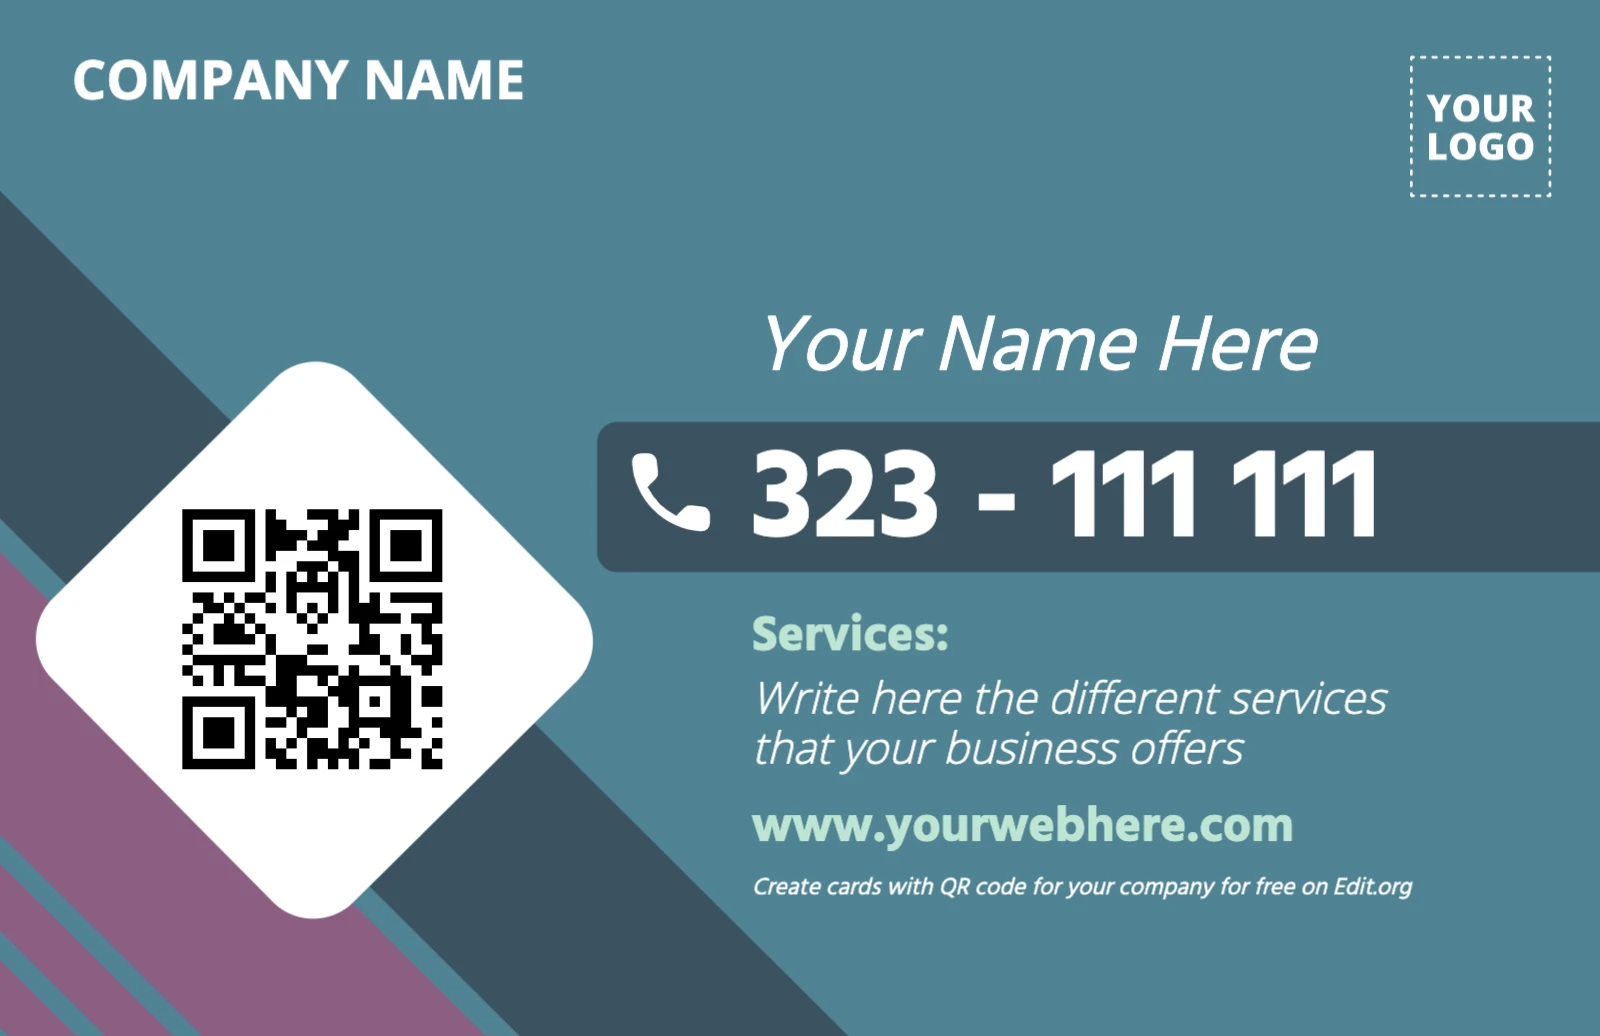 Sample business card with QR code to customize online